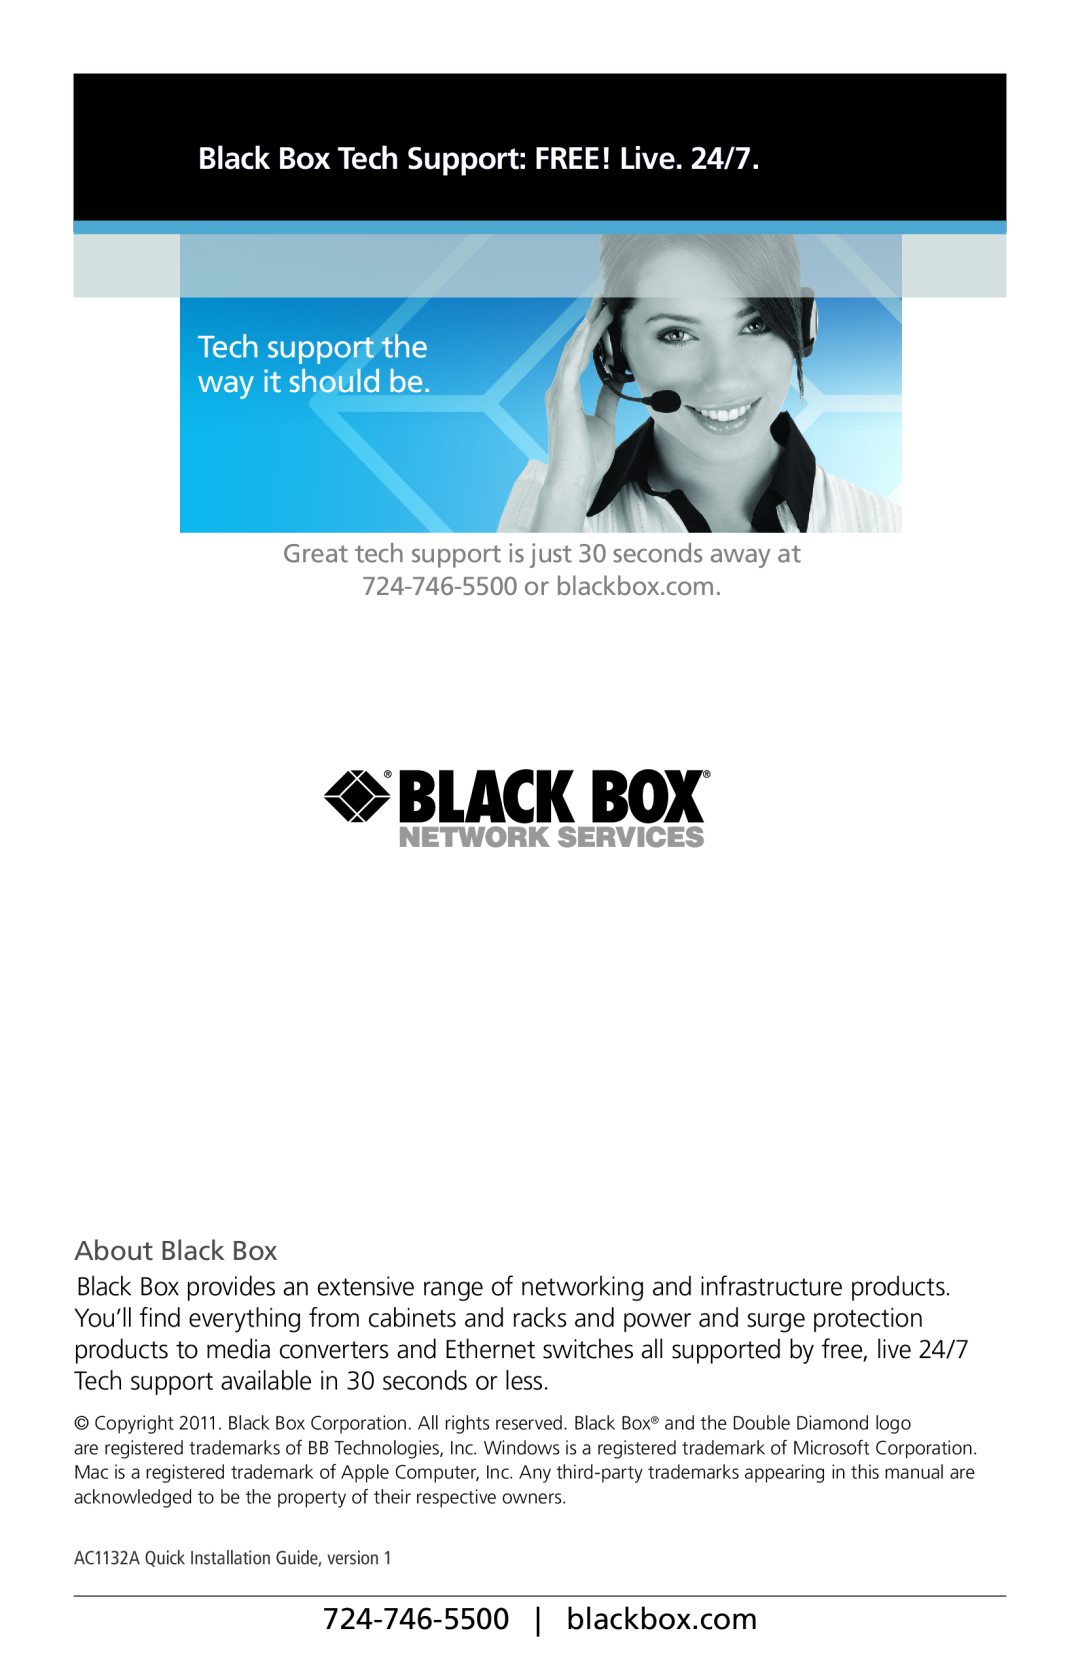 Black Box AC1132A manual Tech support the way it should be, About Black Box, Black Box Tech Support: FREE! Live. 24/7 